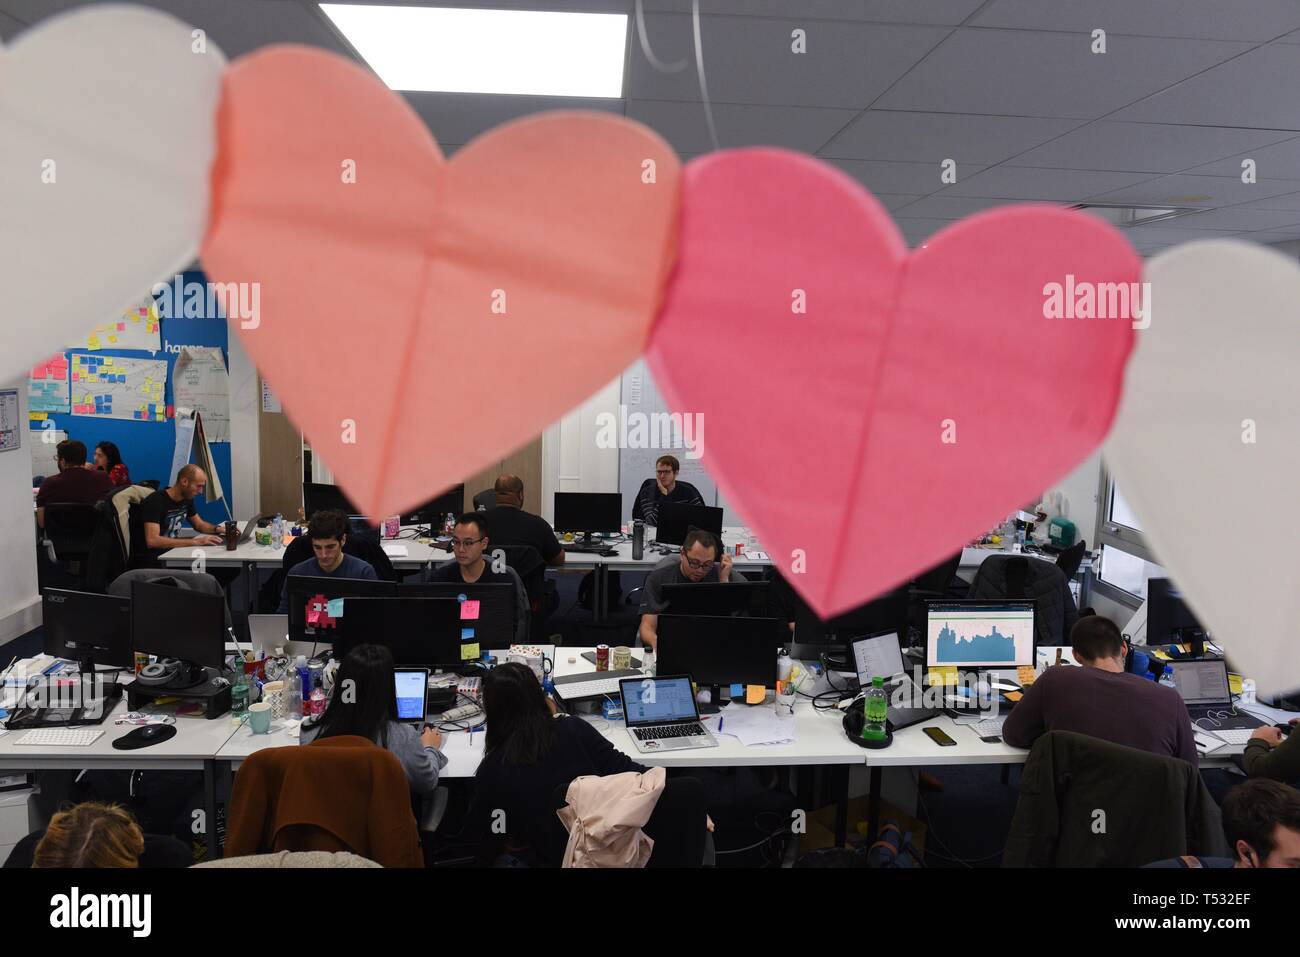 *** FRANCE OUT / STRICTLY NO SALES TO FRENCH MEDIA *** November 23, 2018 - Paris, France: Employees in the office of Happn, a French start-up that developed a dating app allowing users to meet people based on their geolocalisation patterns. Reportage dans les bureaux de Happn, une start-up parisienne connue pour son app de rencontre basee sur la geolocalisation. Stock Photo